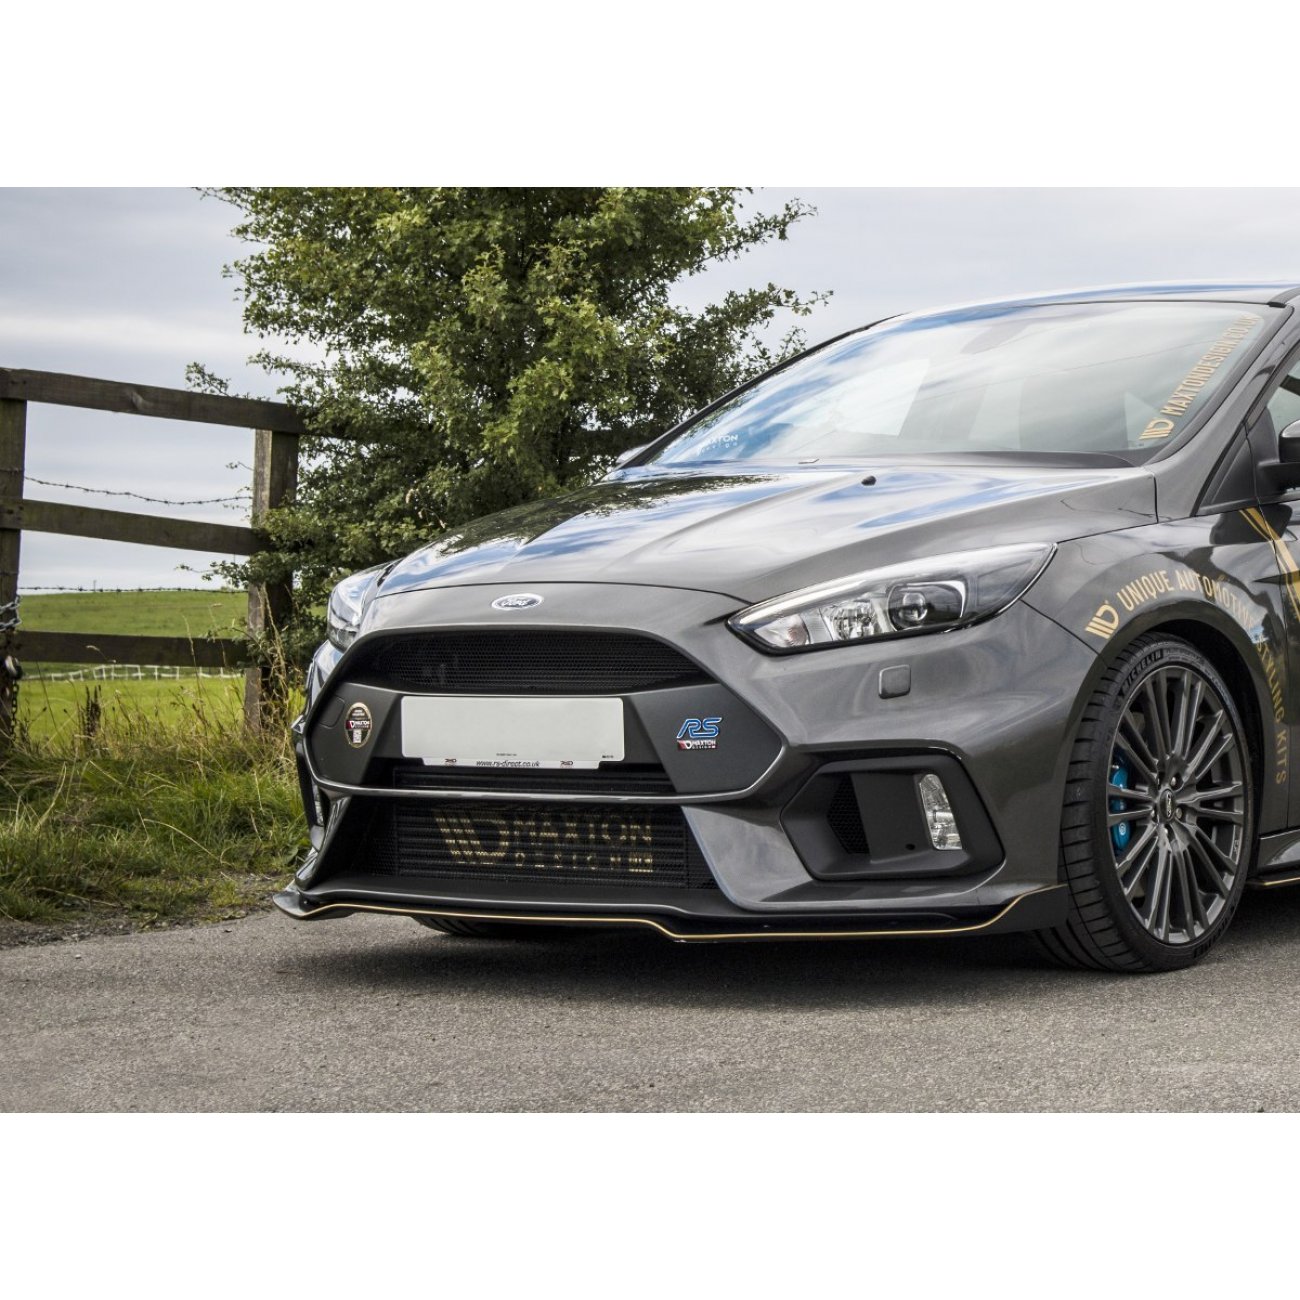 https://mm-concepts.com/media/image/aa/03/4a/cup-spoilerlippe-front-ansatz-aero-ford-focus-mk3-rs-3GenLnk79CKe0a.jpg